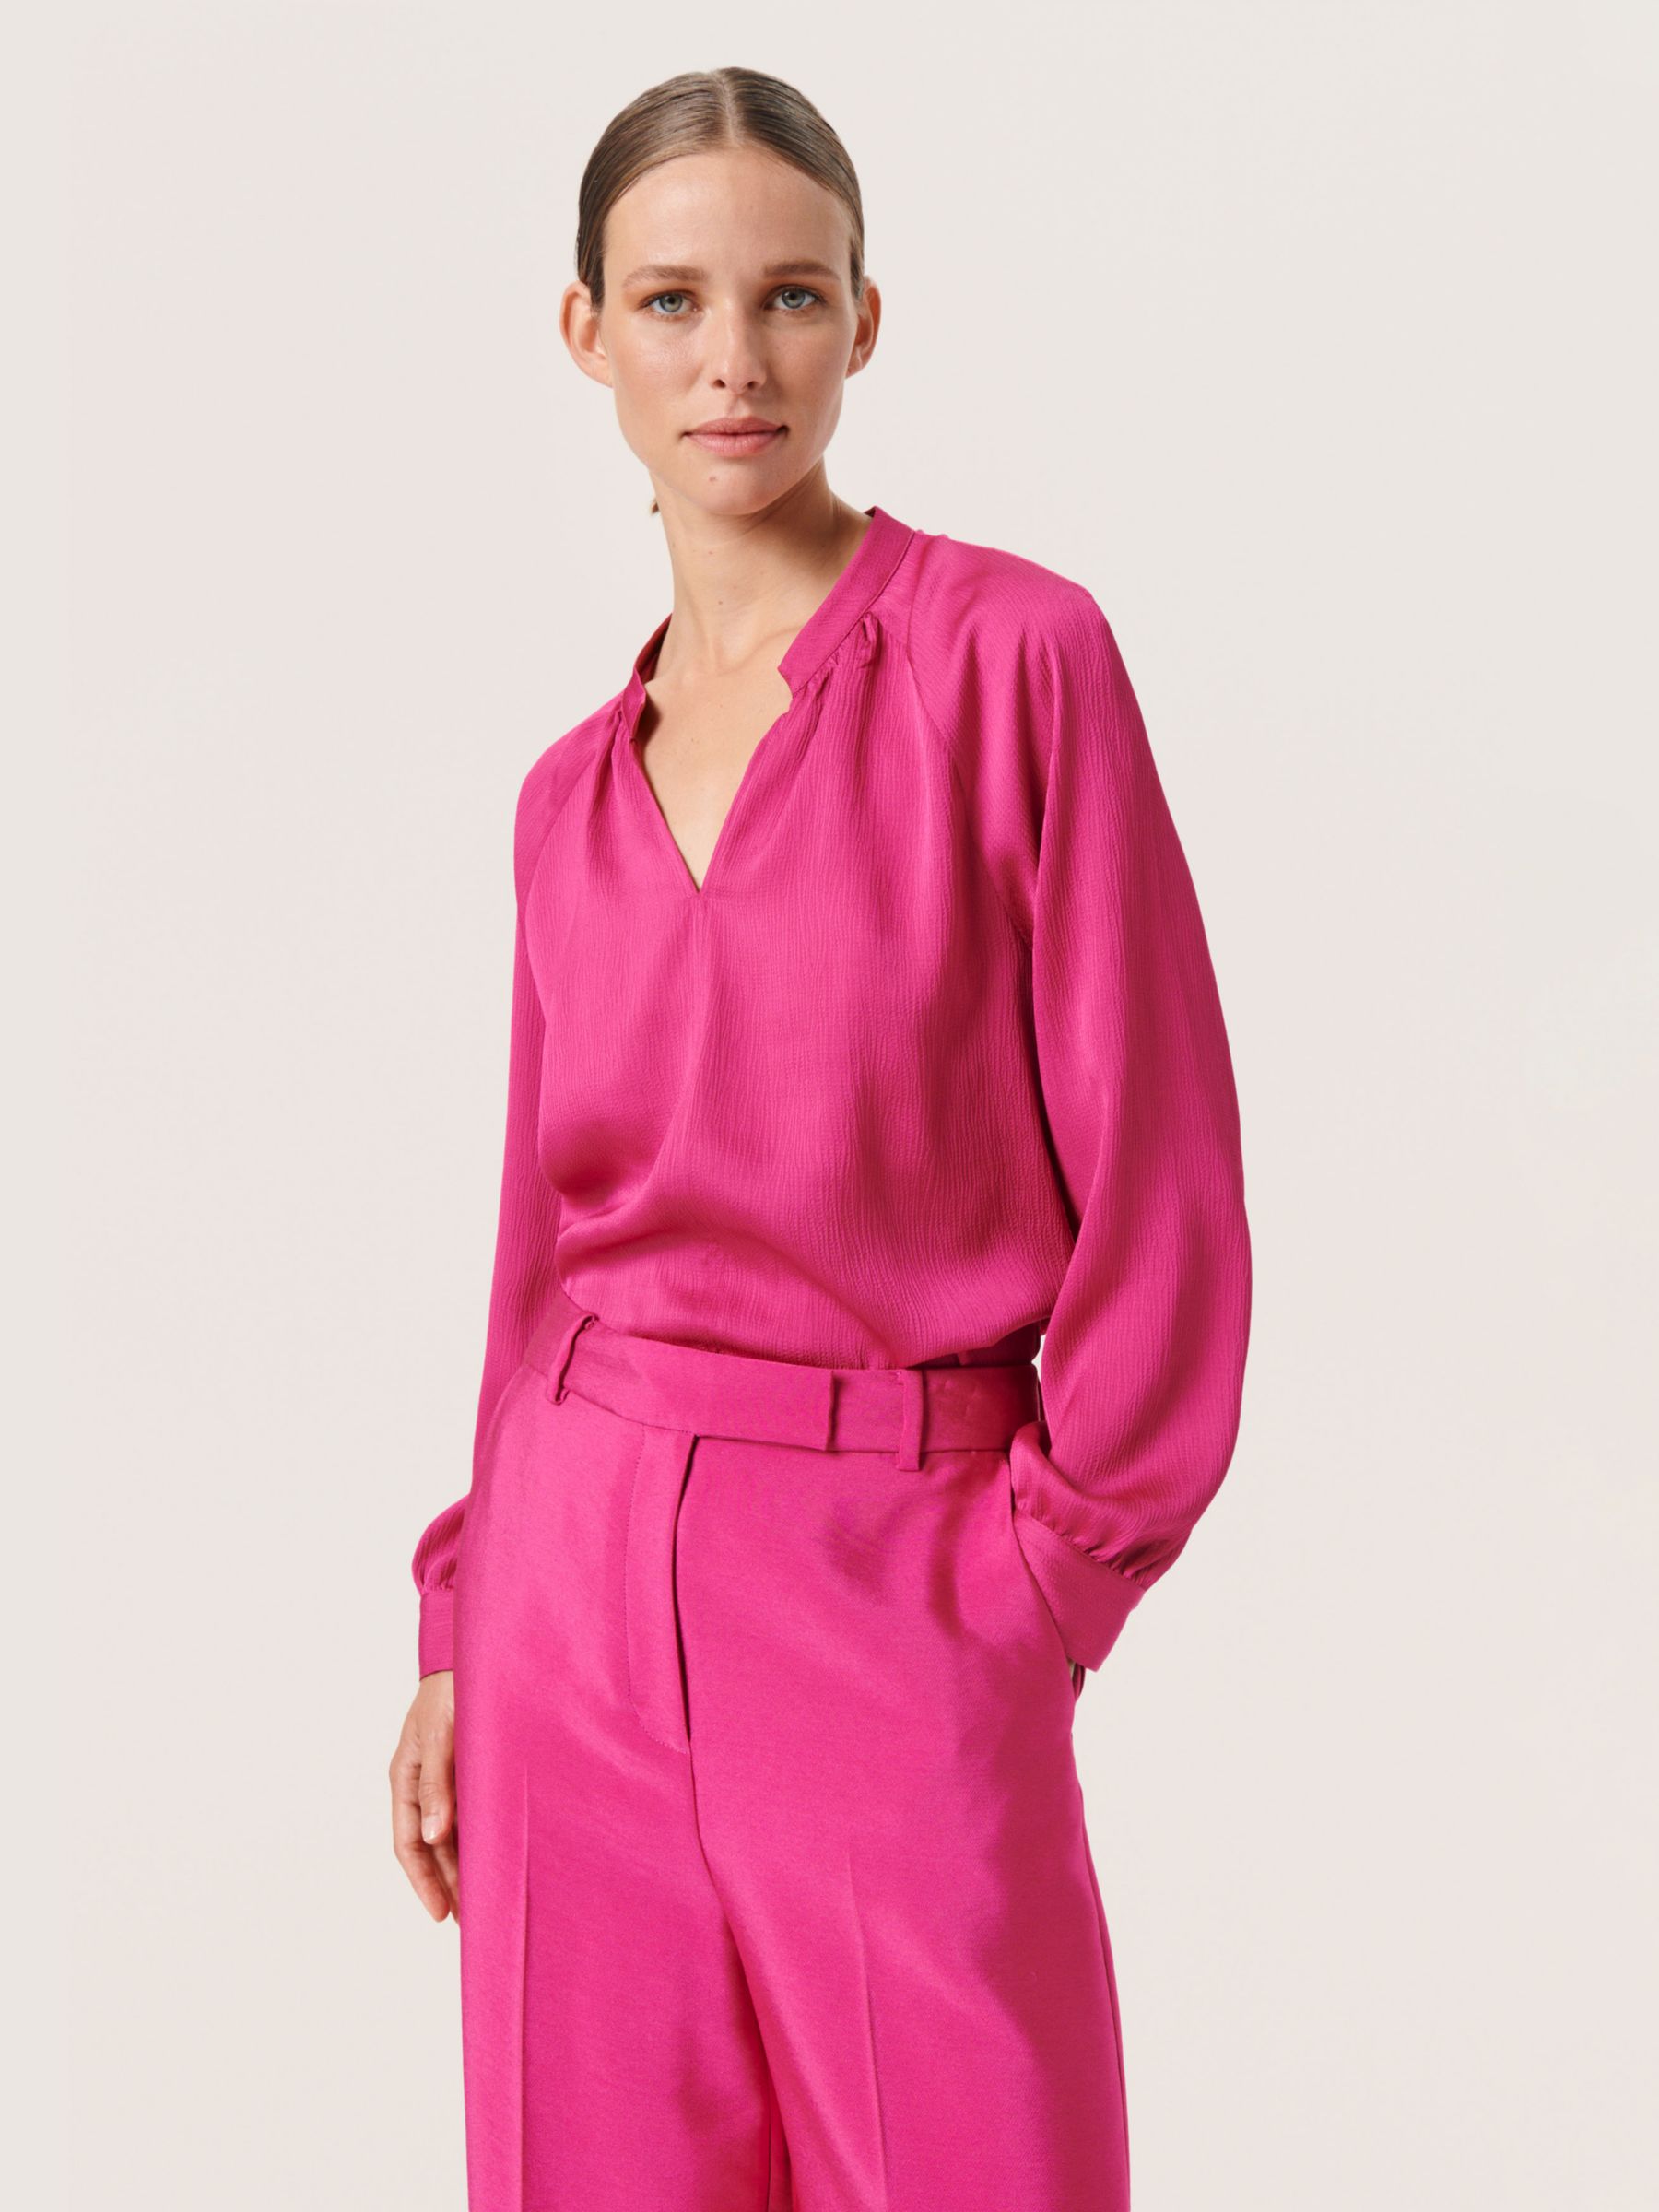 Buy Soaked In Luxury Ioana Blouse Online at johnlewis.com